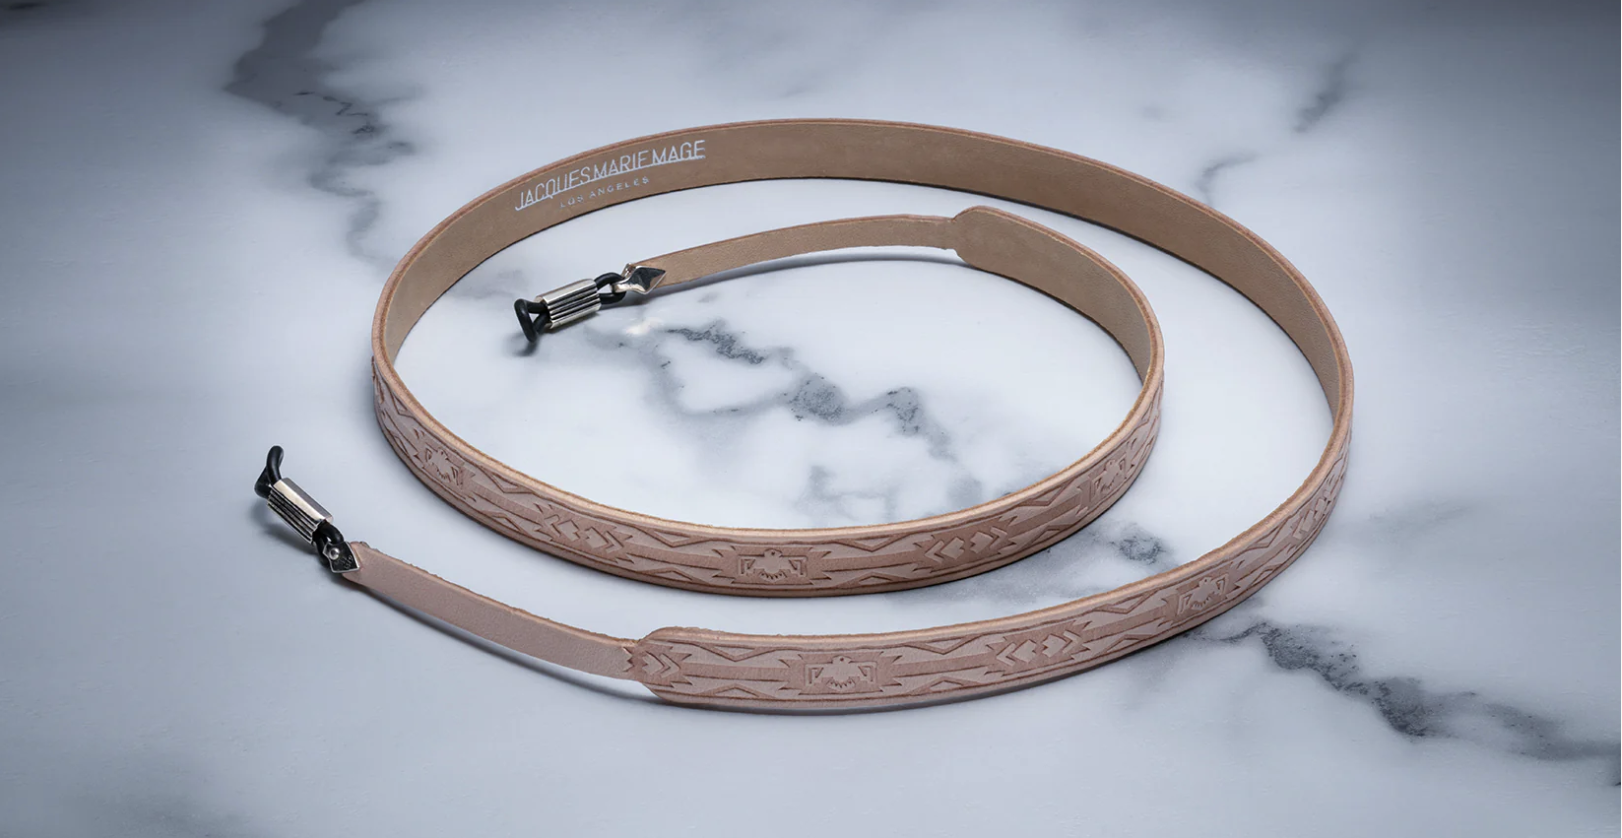 atelier mira-JACQUES MARIE MAGE TOOLED STRAP optical boutique